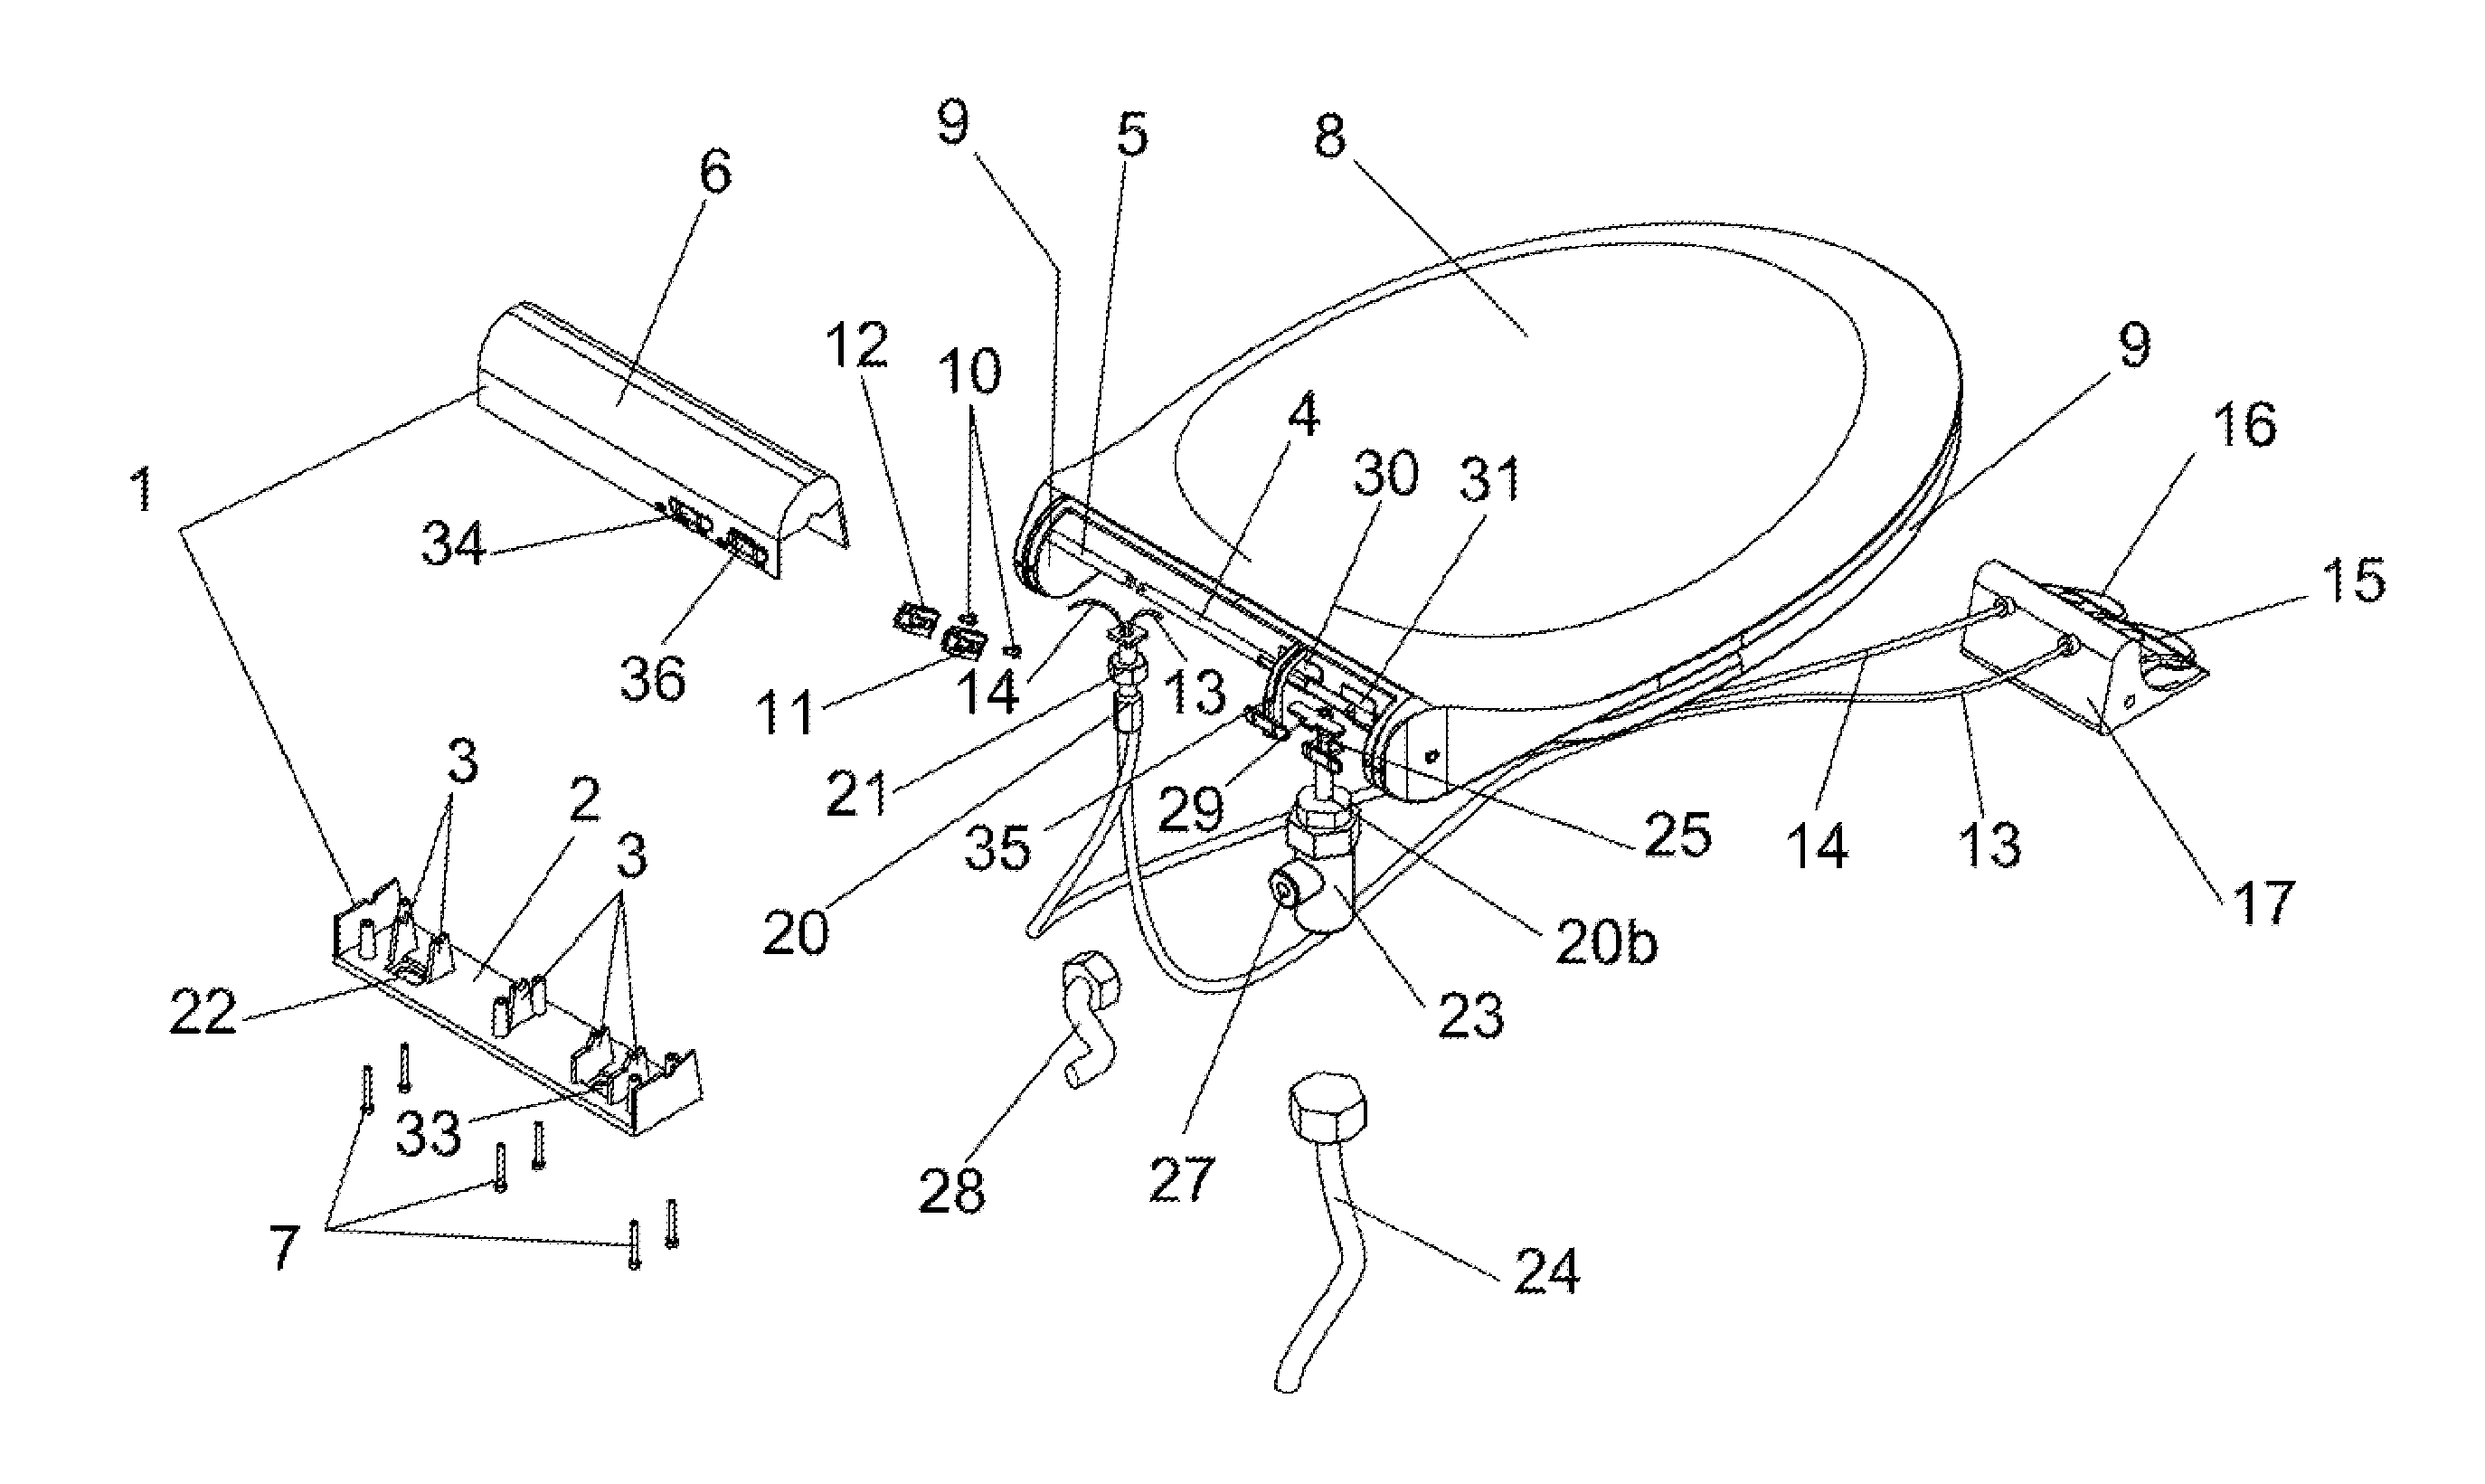 Device comprising actuating mechanisms with a pedal and comprising a hydraulic actuator for lifting and lowering, respectively, the cover and the seat of a wc